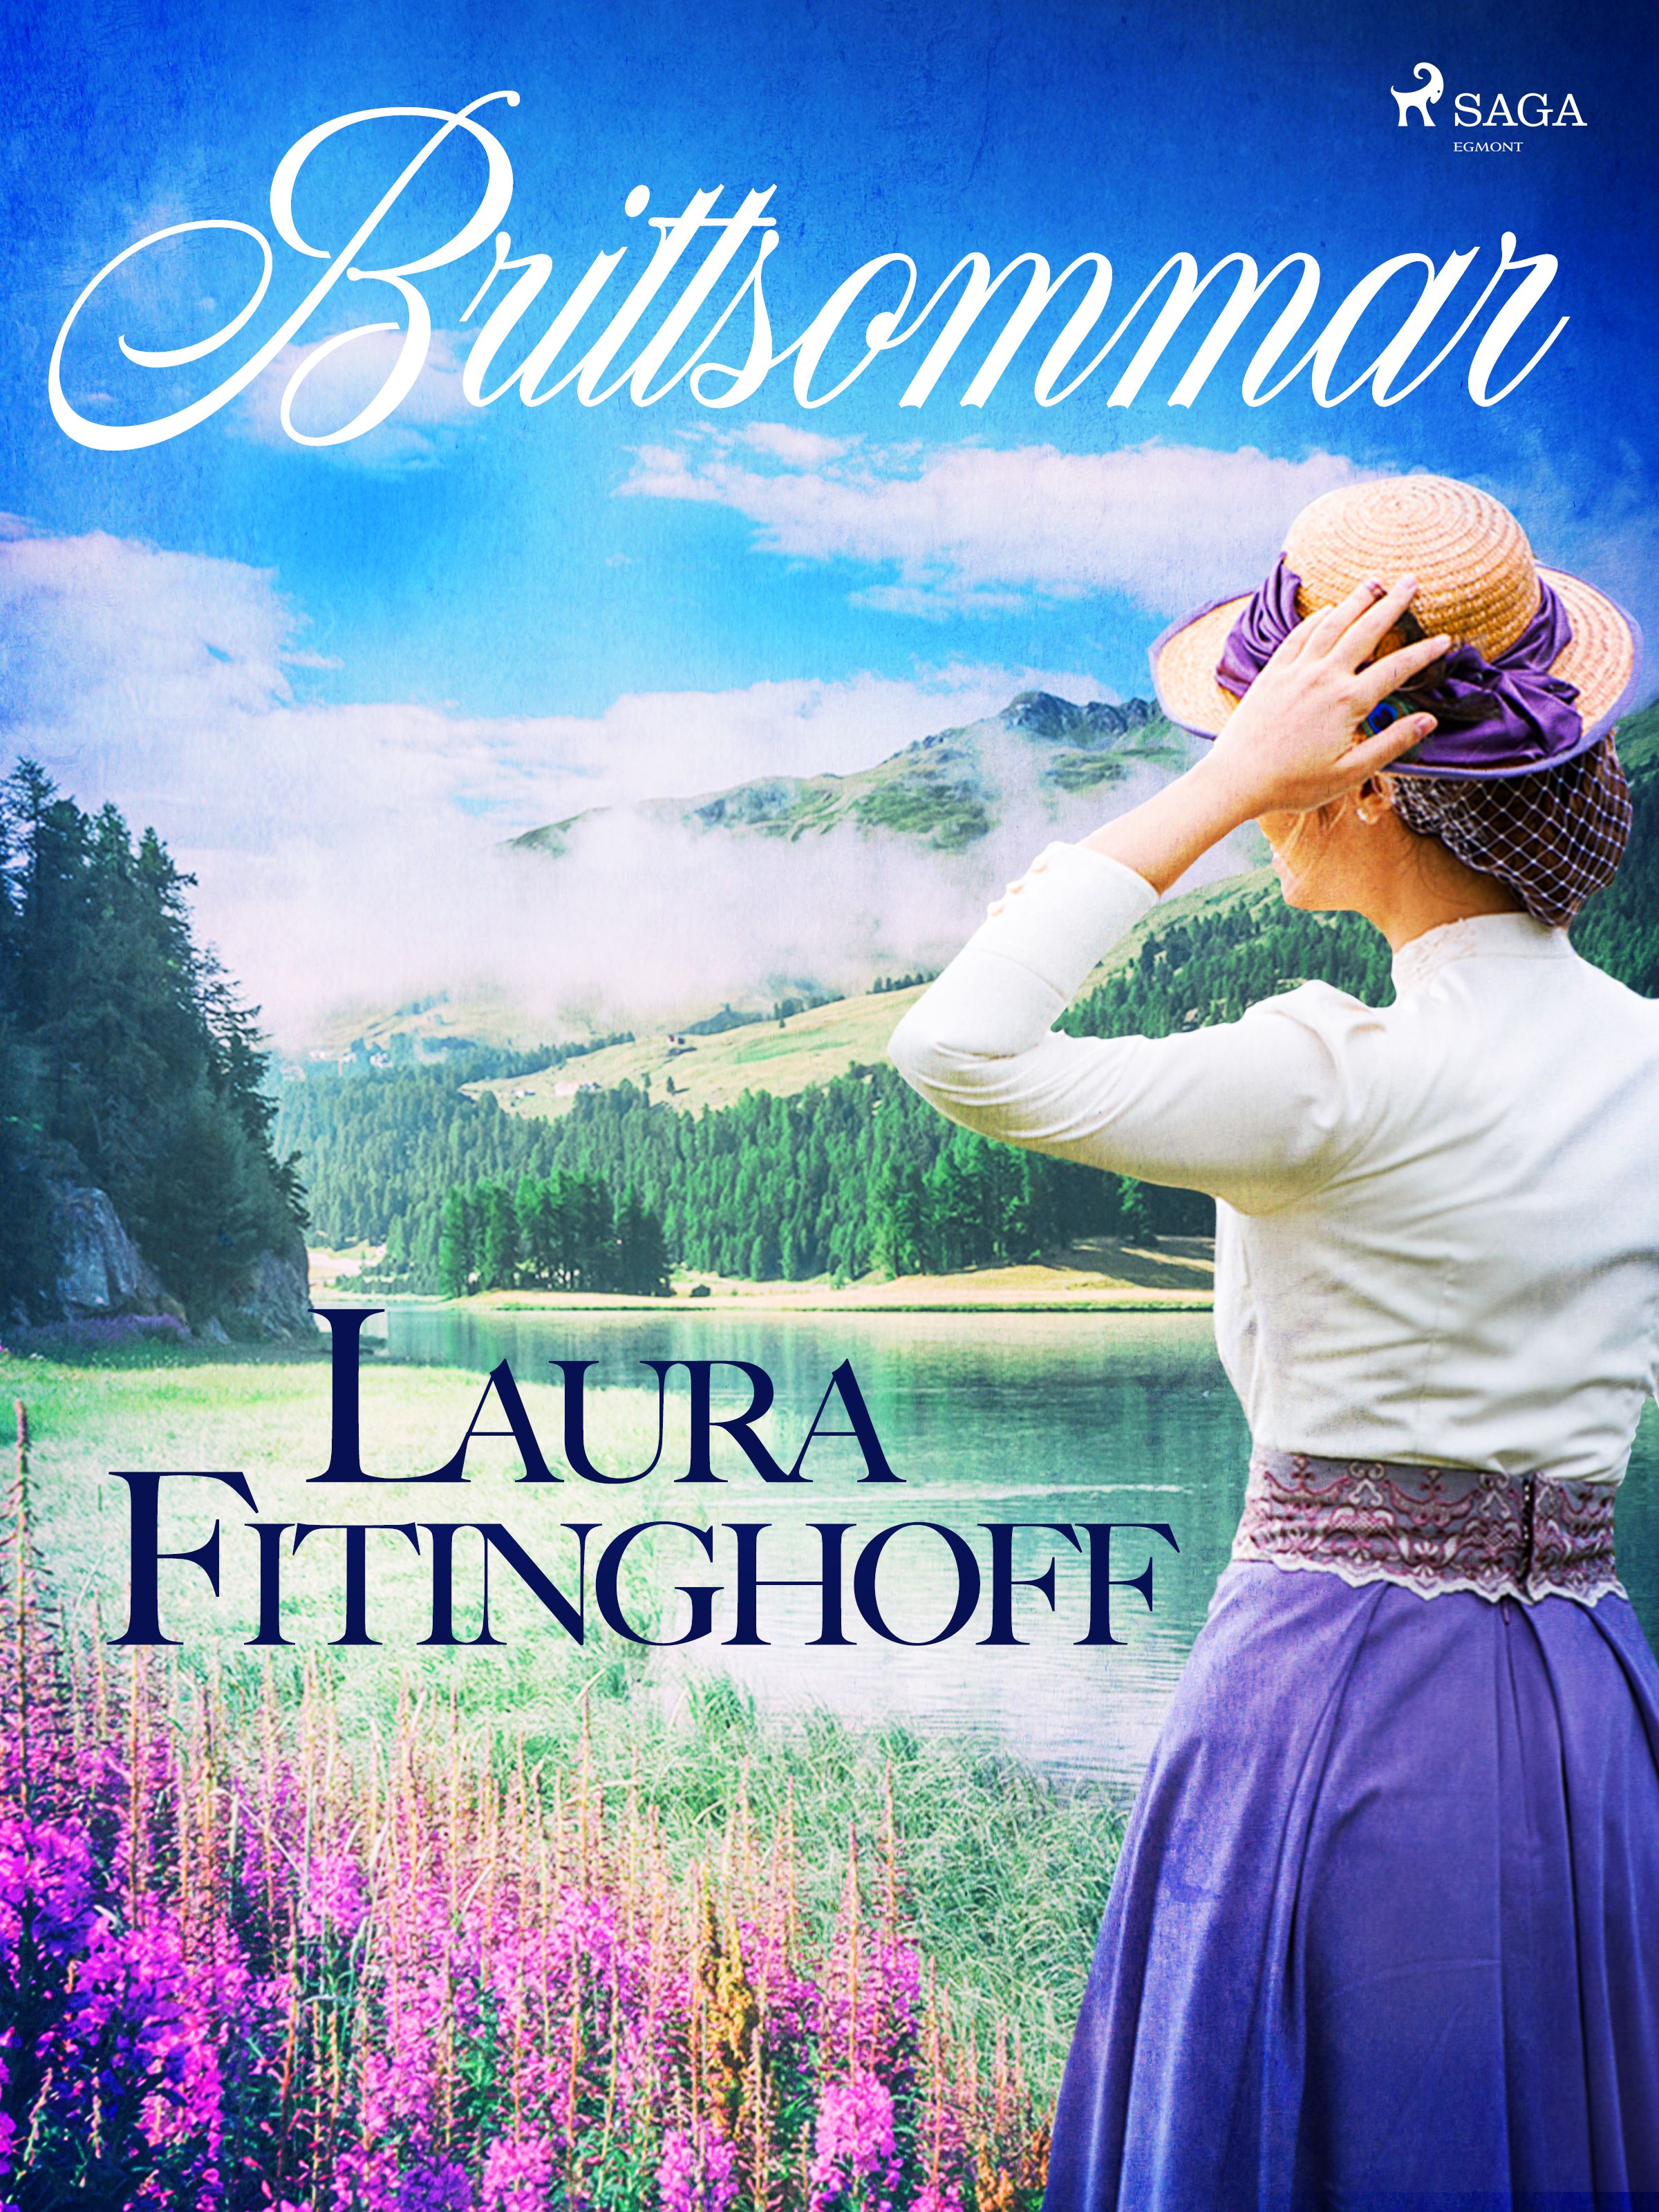 Brittsommar, eBook by Laura Fitinghoff